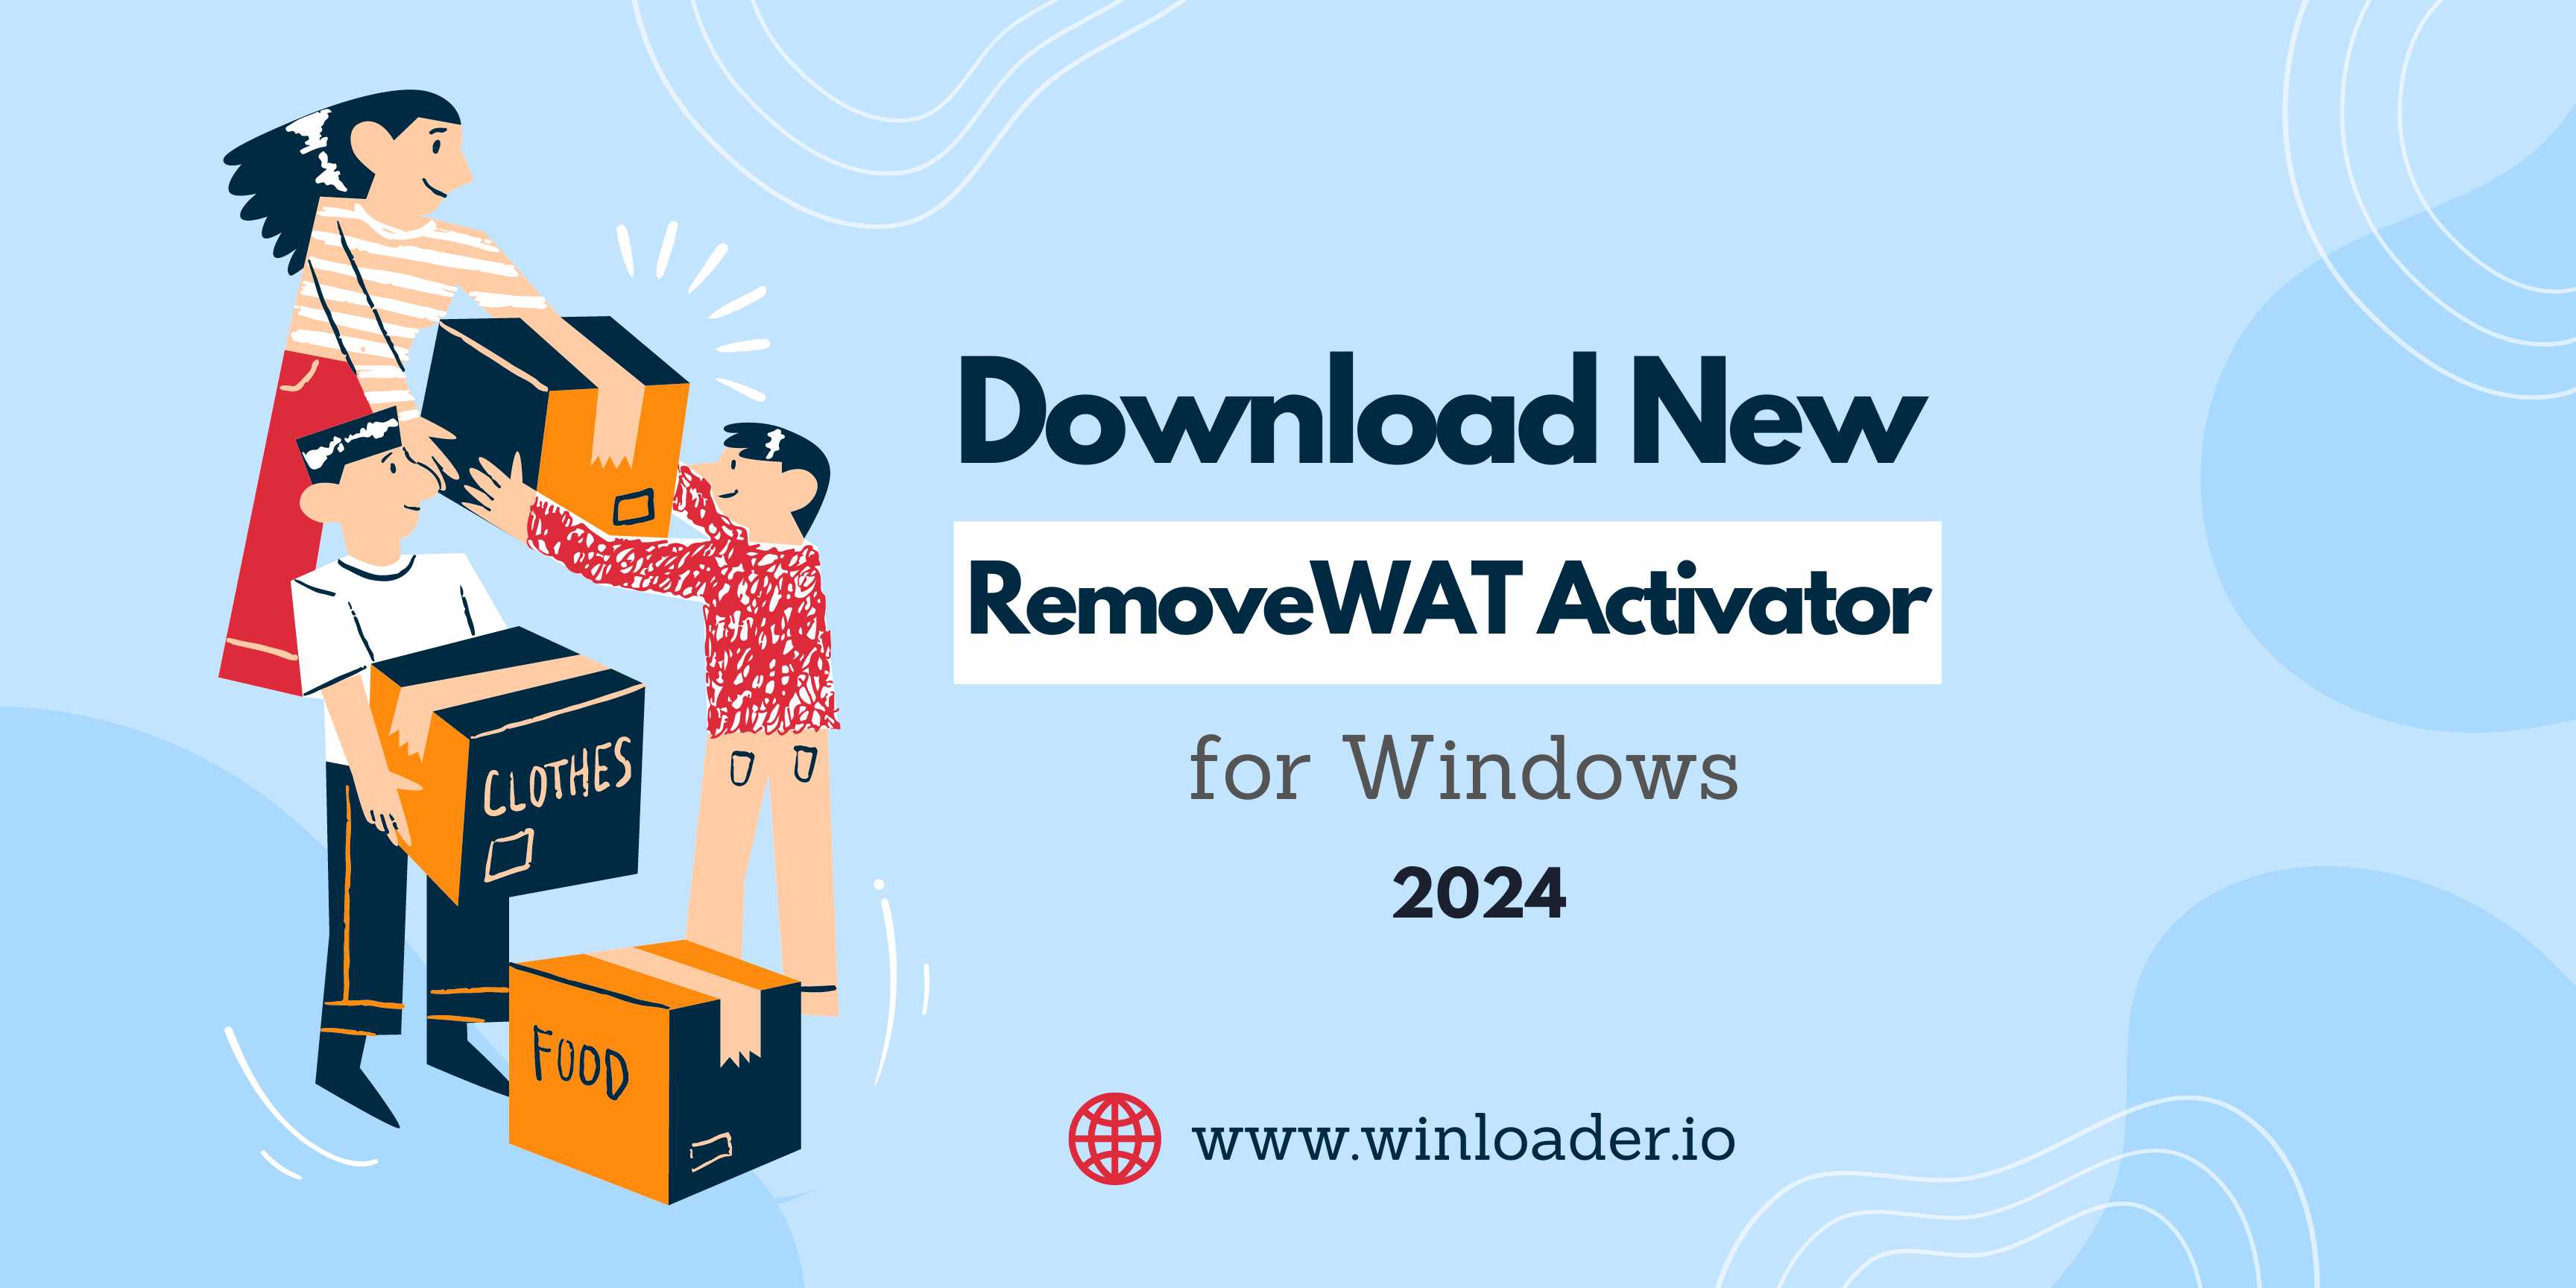 Download New RemoveWAT Activator for Windows [2024]